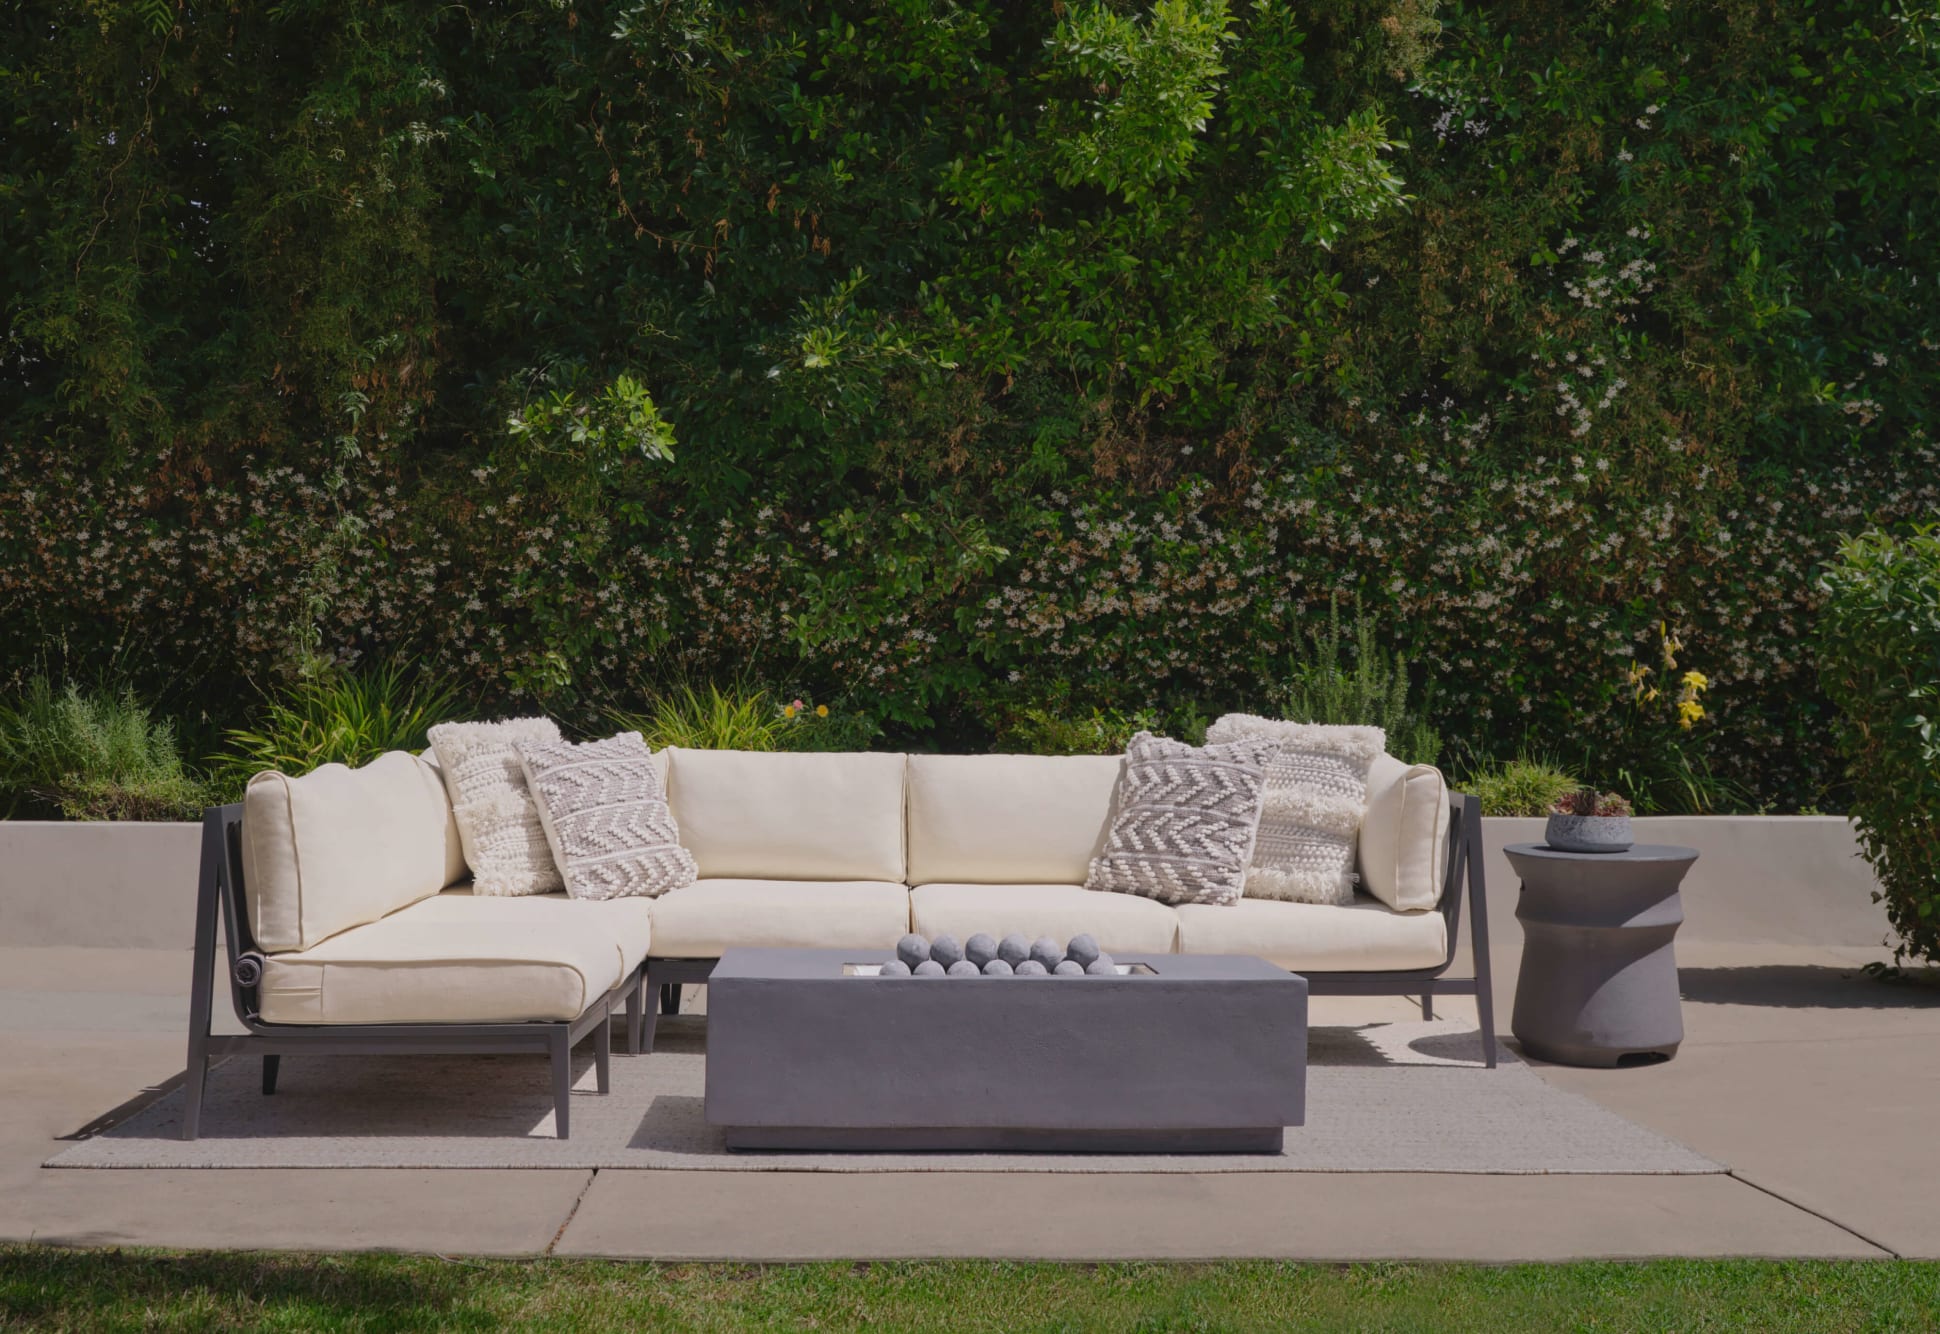 Live Outer 98" Charcoal Aluminum Outdoor 3-Seat Sofa With Palisades Cream Cushion